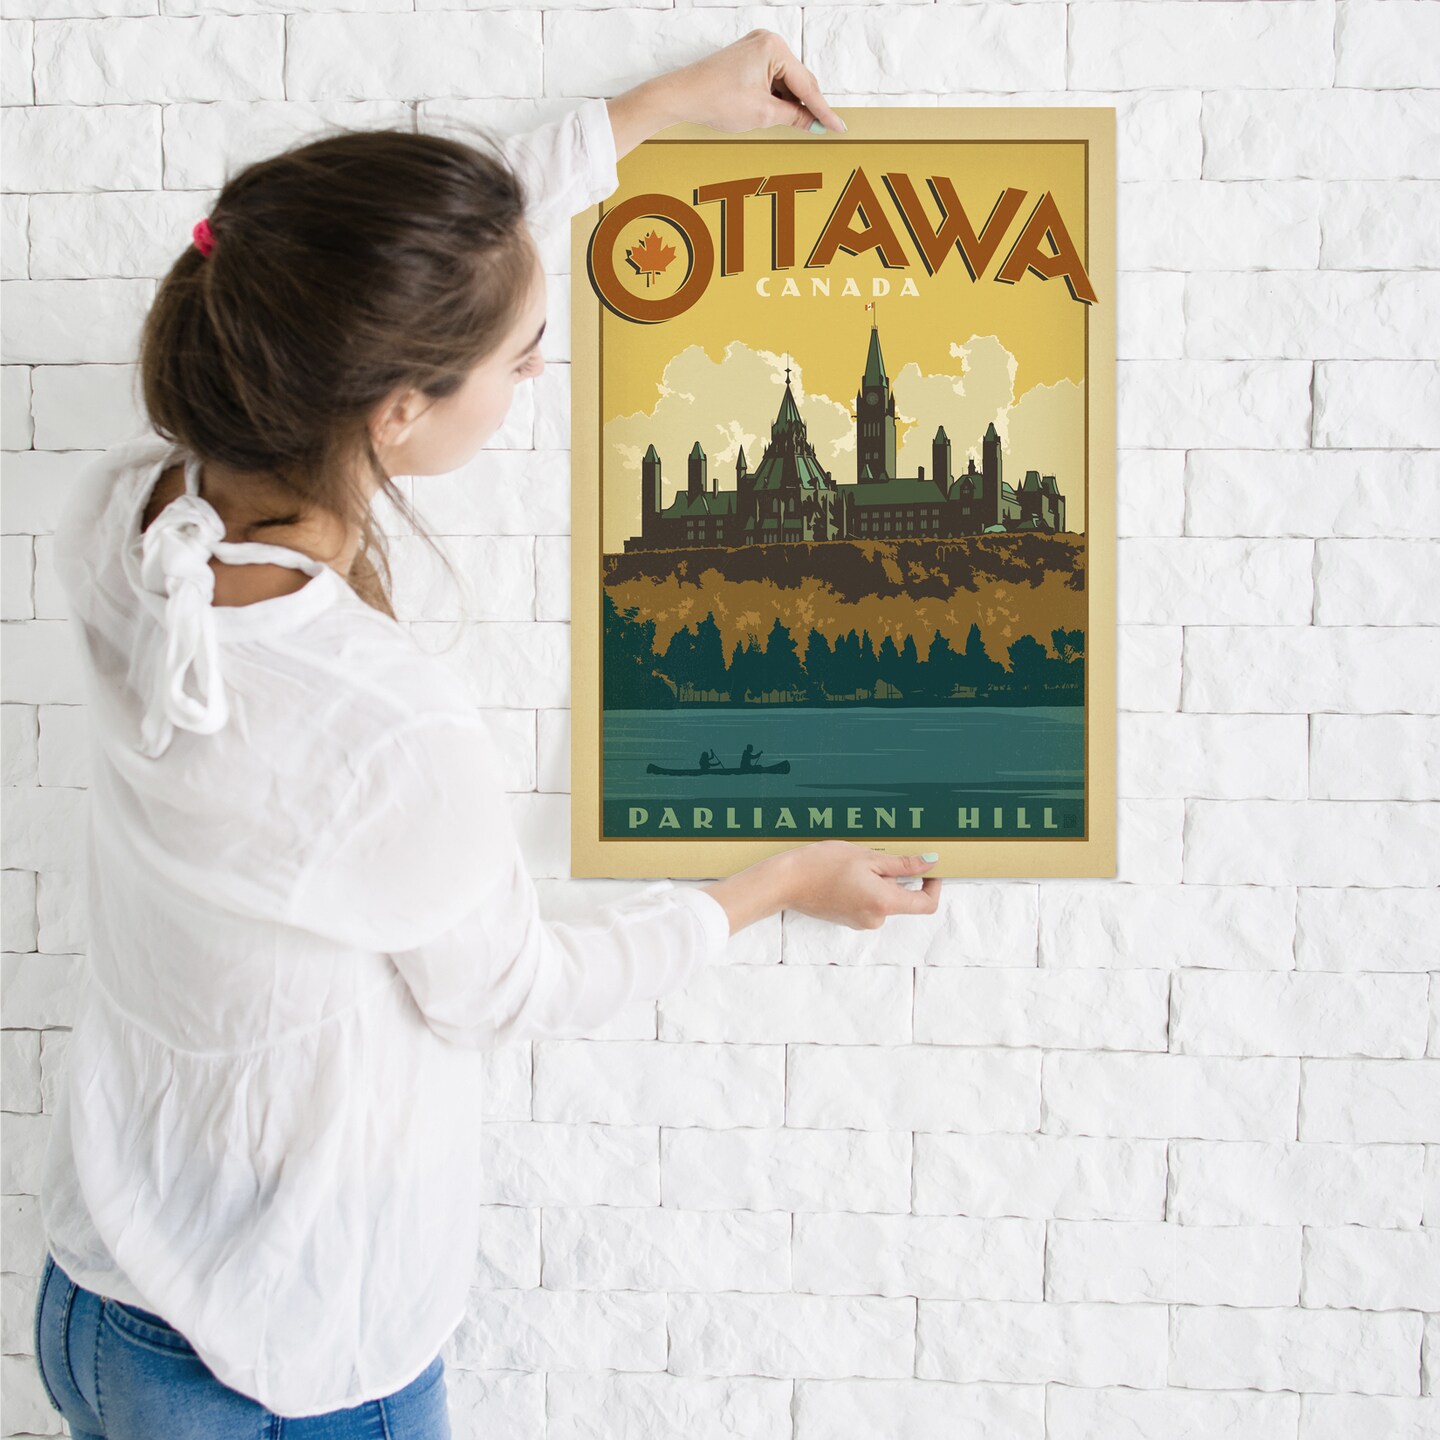 Wt Ottawa by Anderson Design Group  Poster Art Print - Americanflat